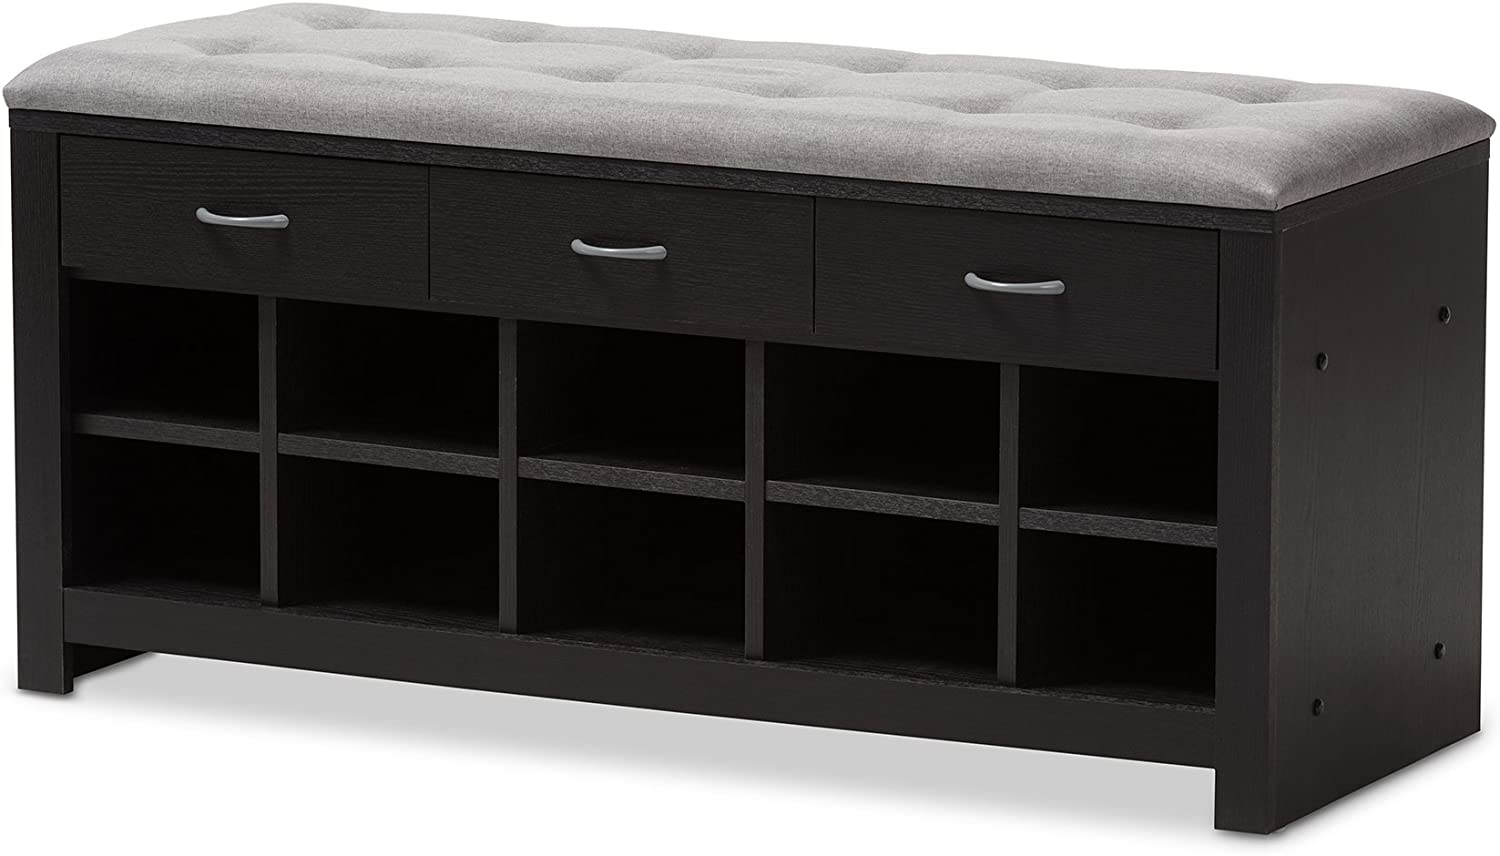 Baxton Studio 10 Cubby Upholstered Shoe Storage Bench in Gray